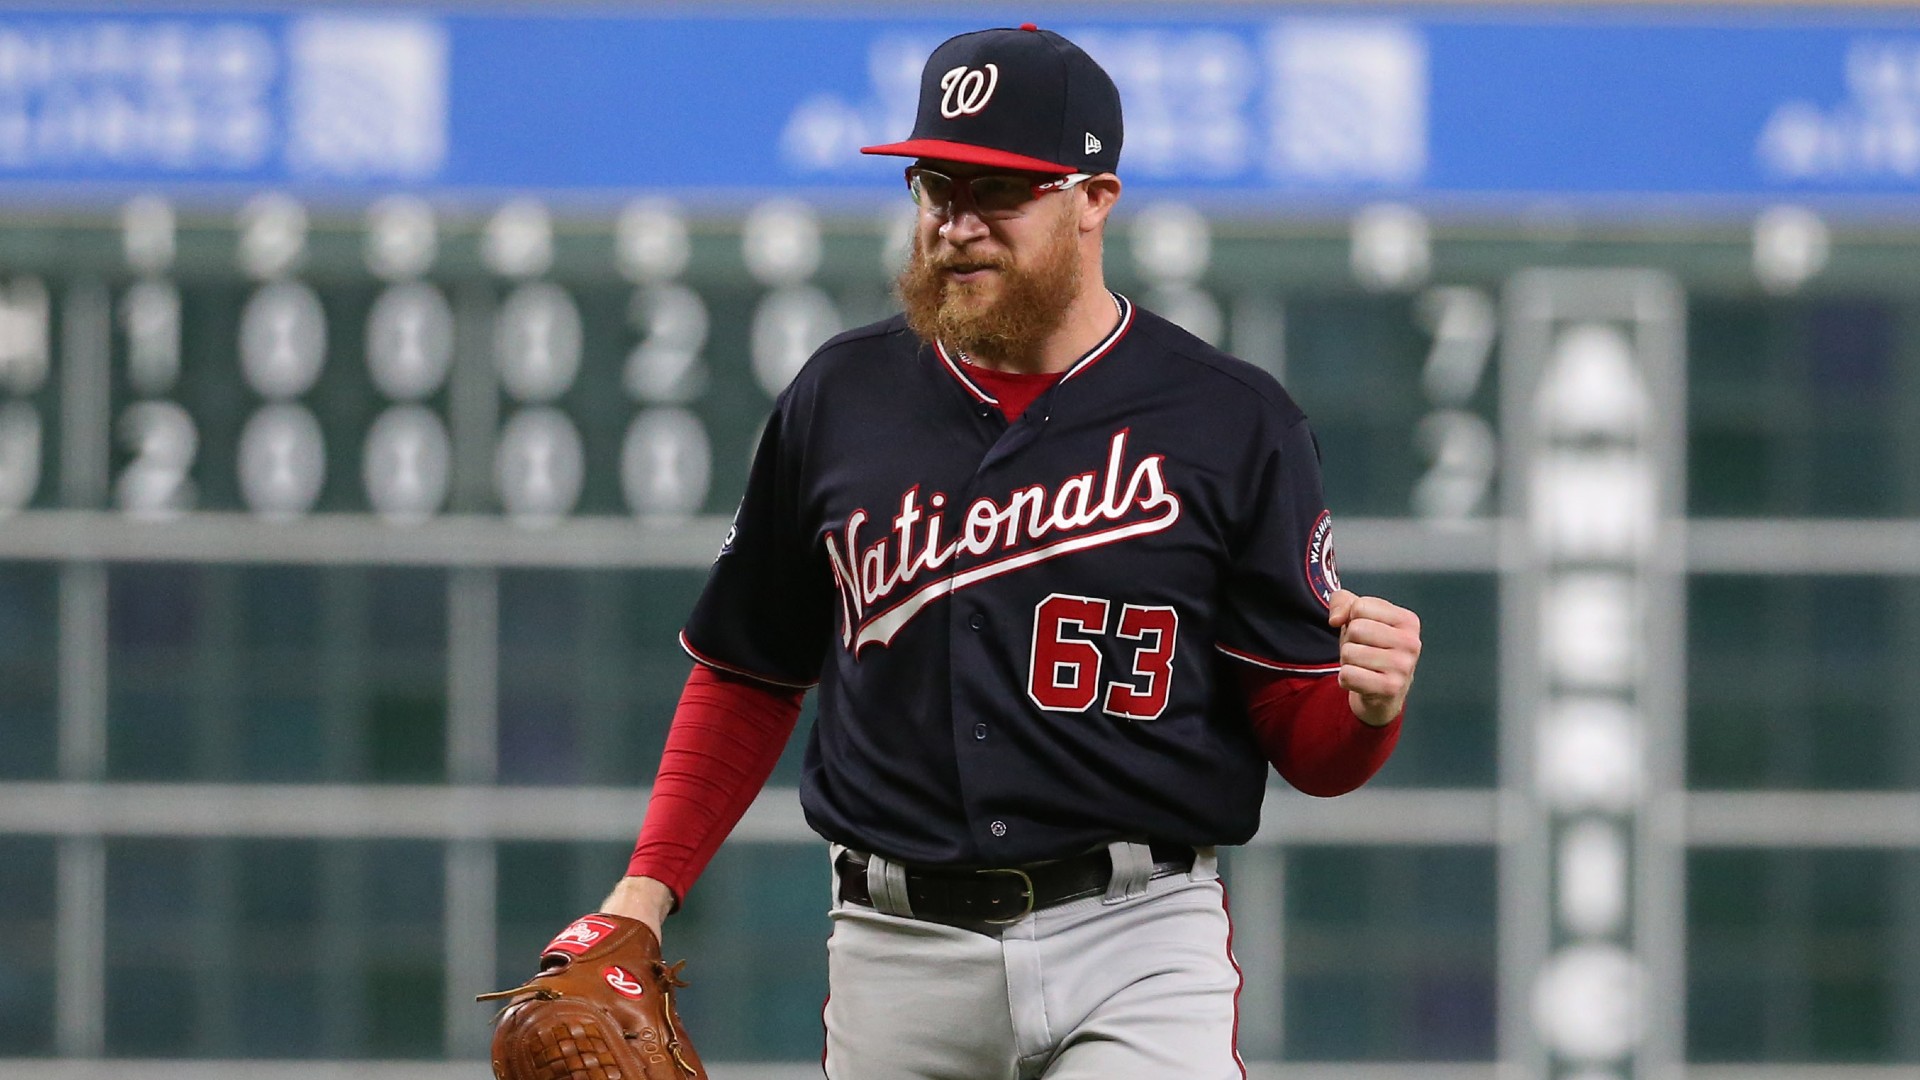 Report: Former Nationals Closer Sean Doolittle ‘Close' to Deal With Reds